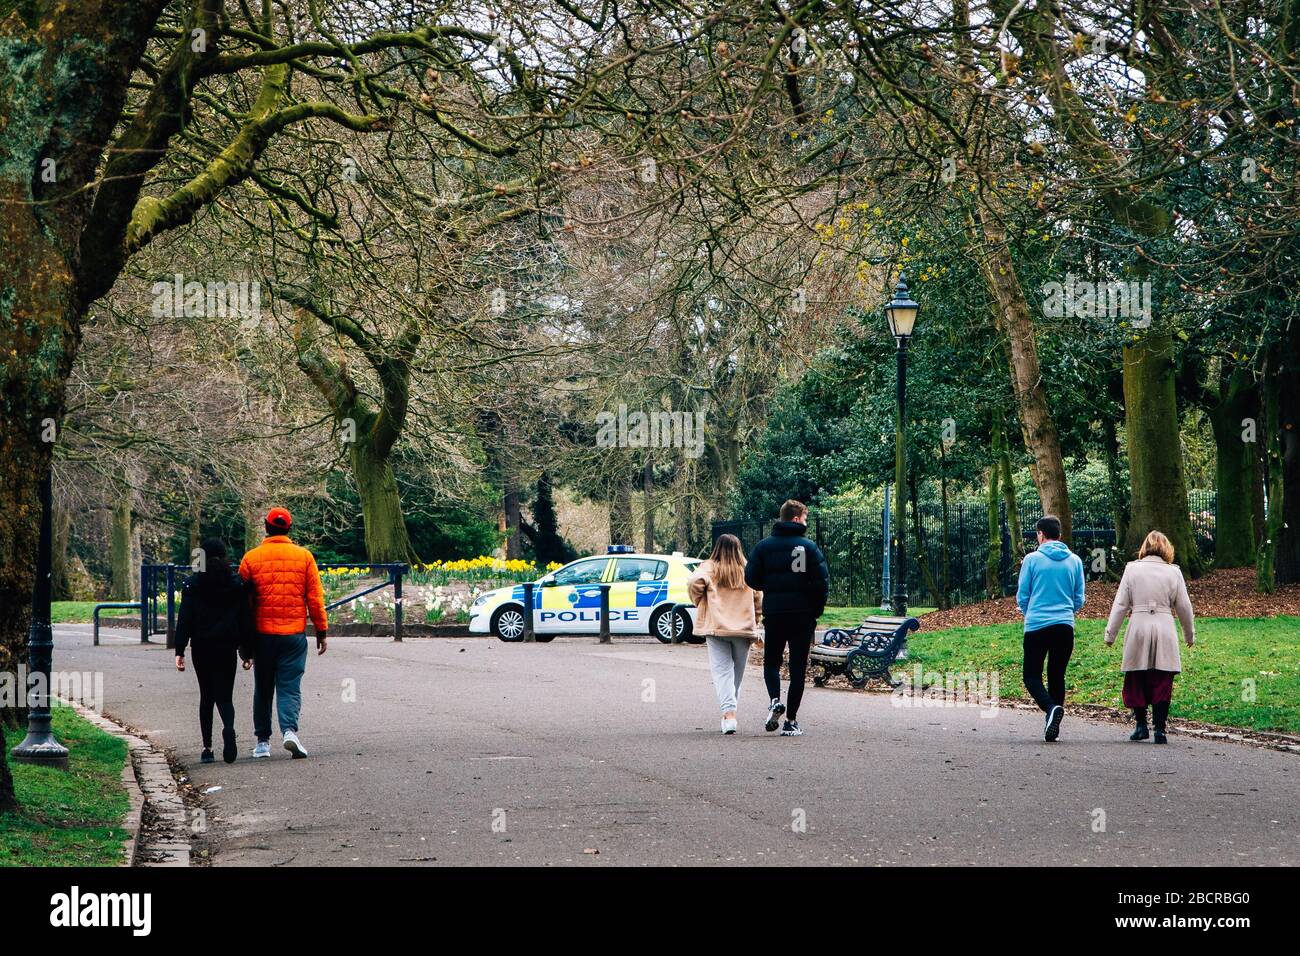 Social distancing UK. People outside enjoying a walk in Liverpool's Sefton park during coronavirus lockdown. Police car in the background patrolling Stock Photo